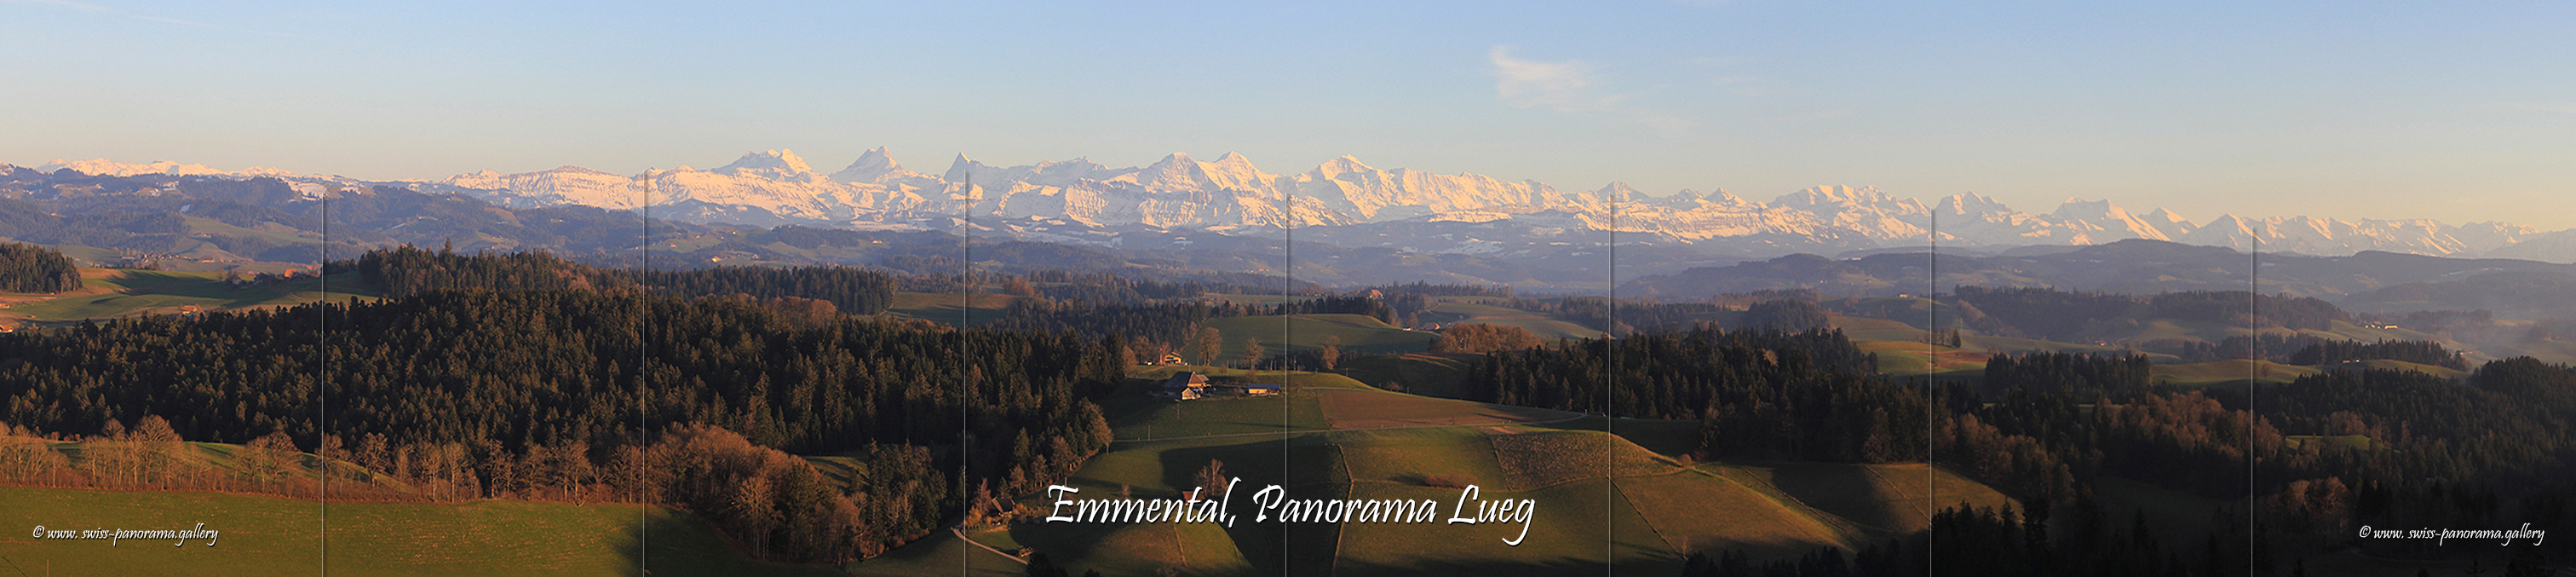 Swiss Panorama Emmenthal